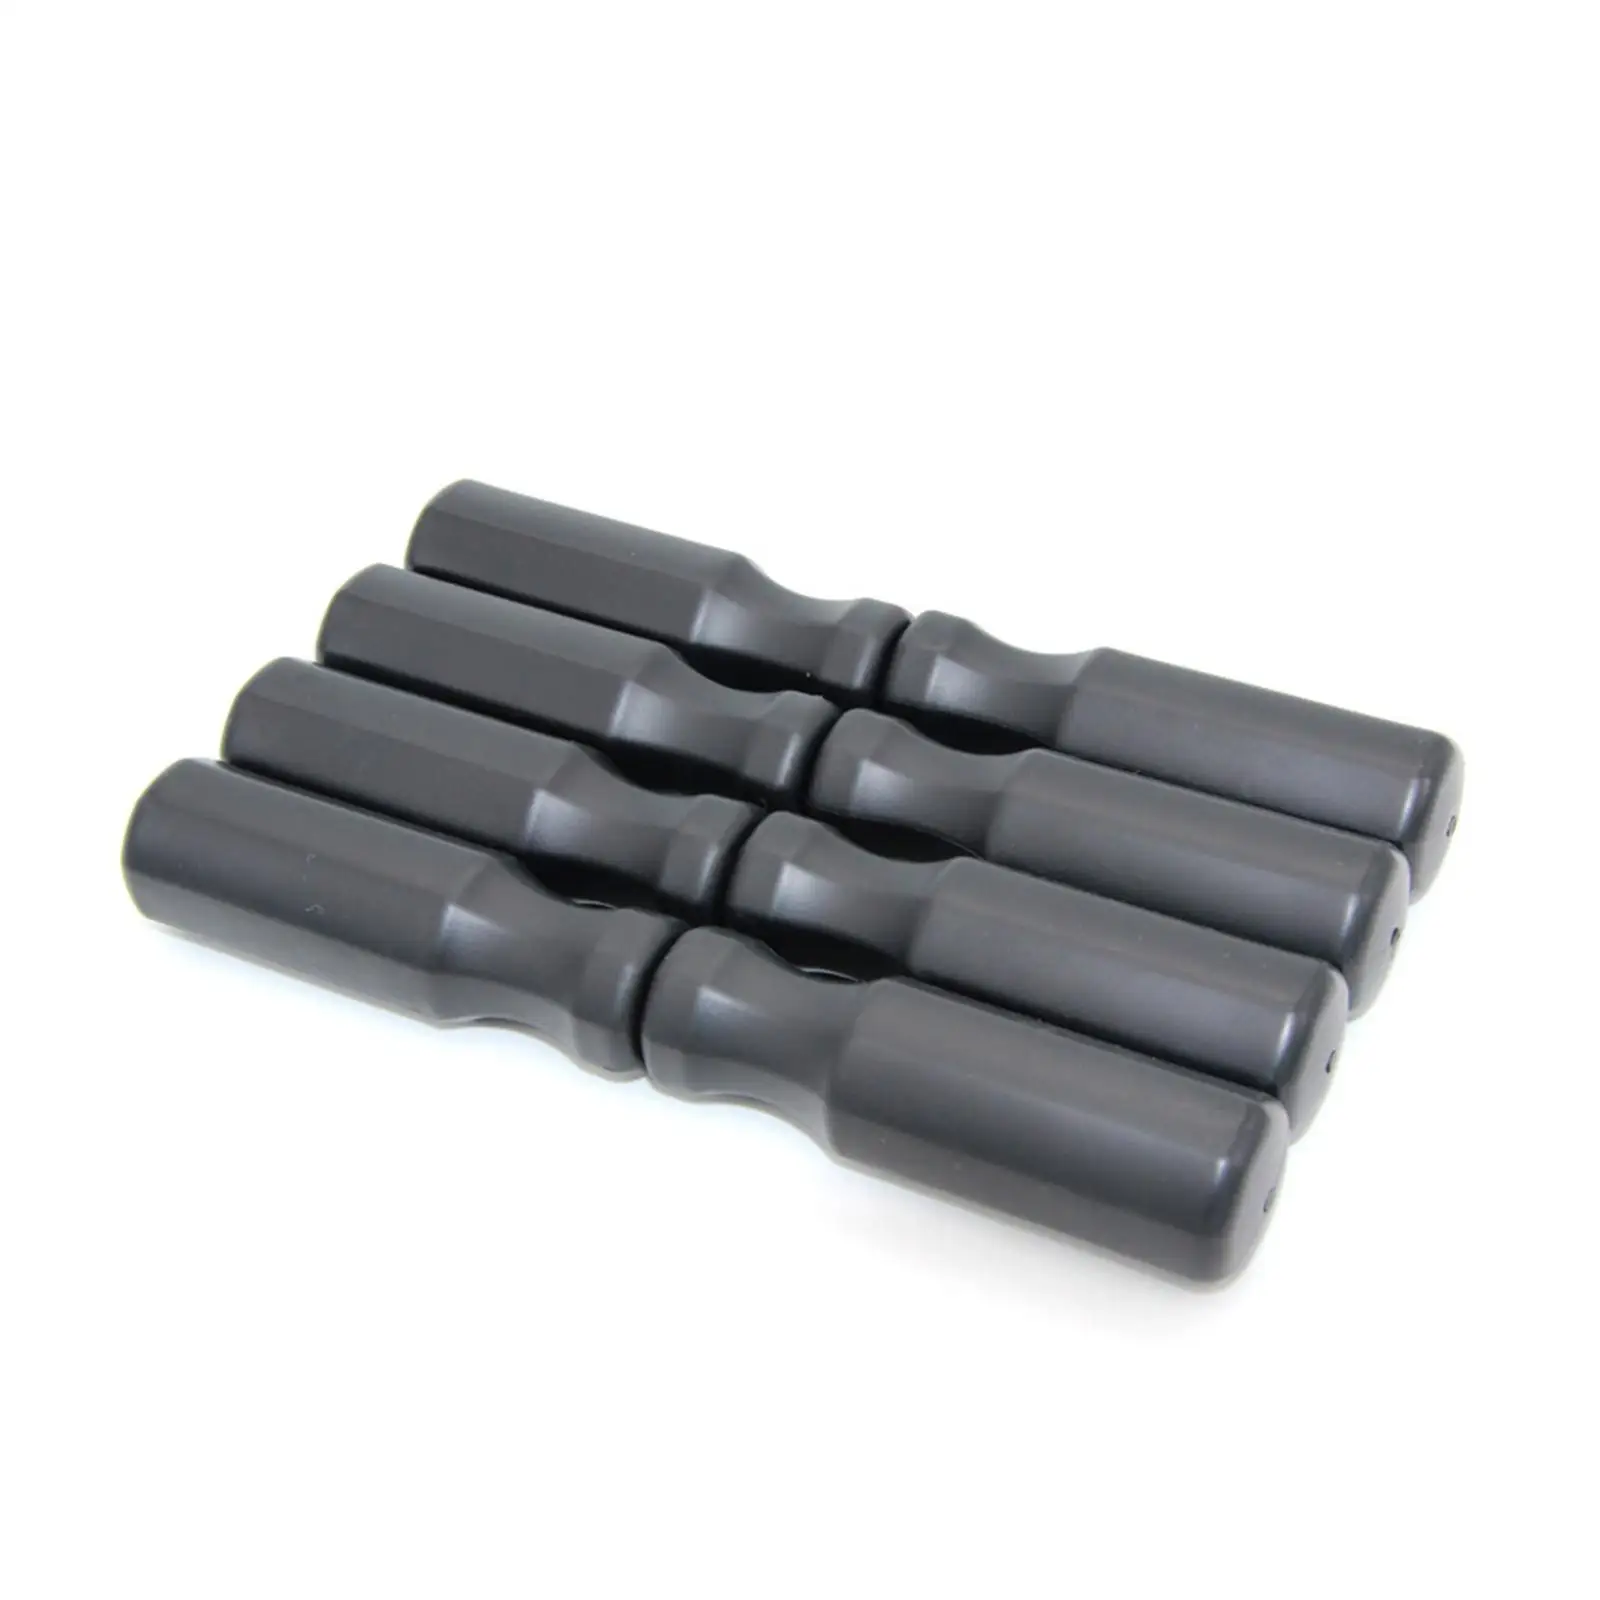 8Pcs Foosball Handle Grip Rod Octagonal Replacement Handles for Table Soccer